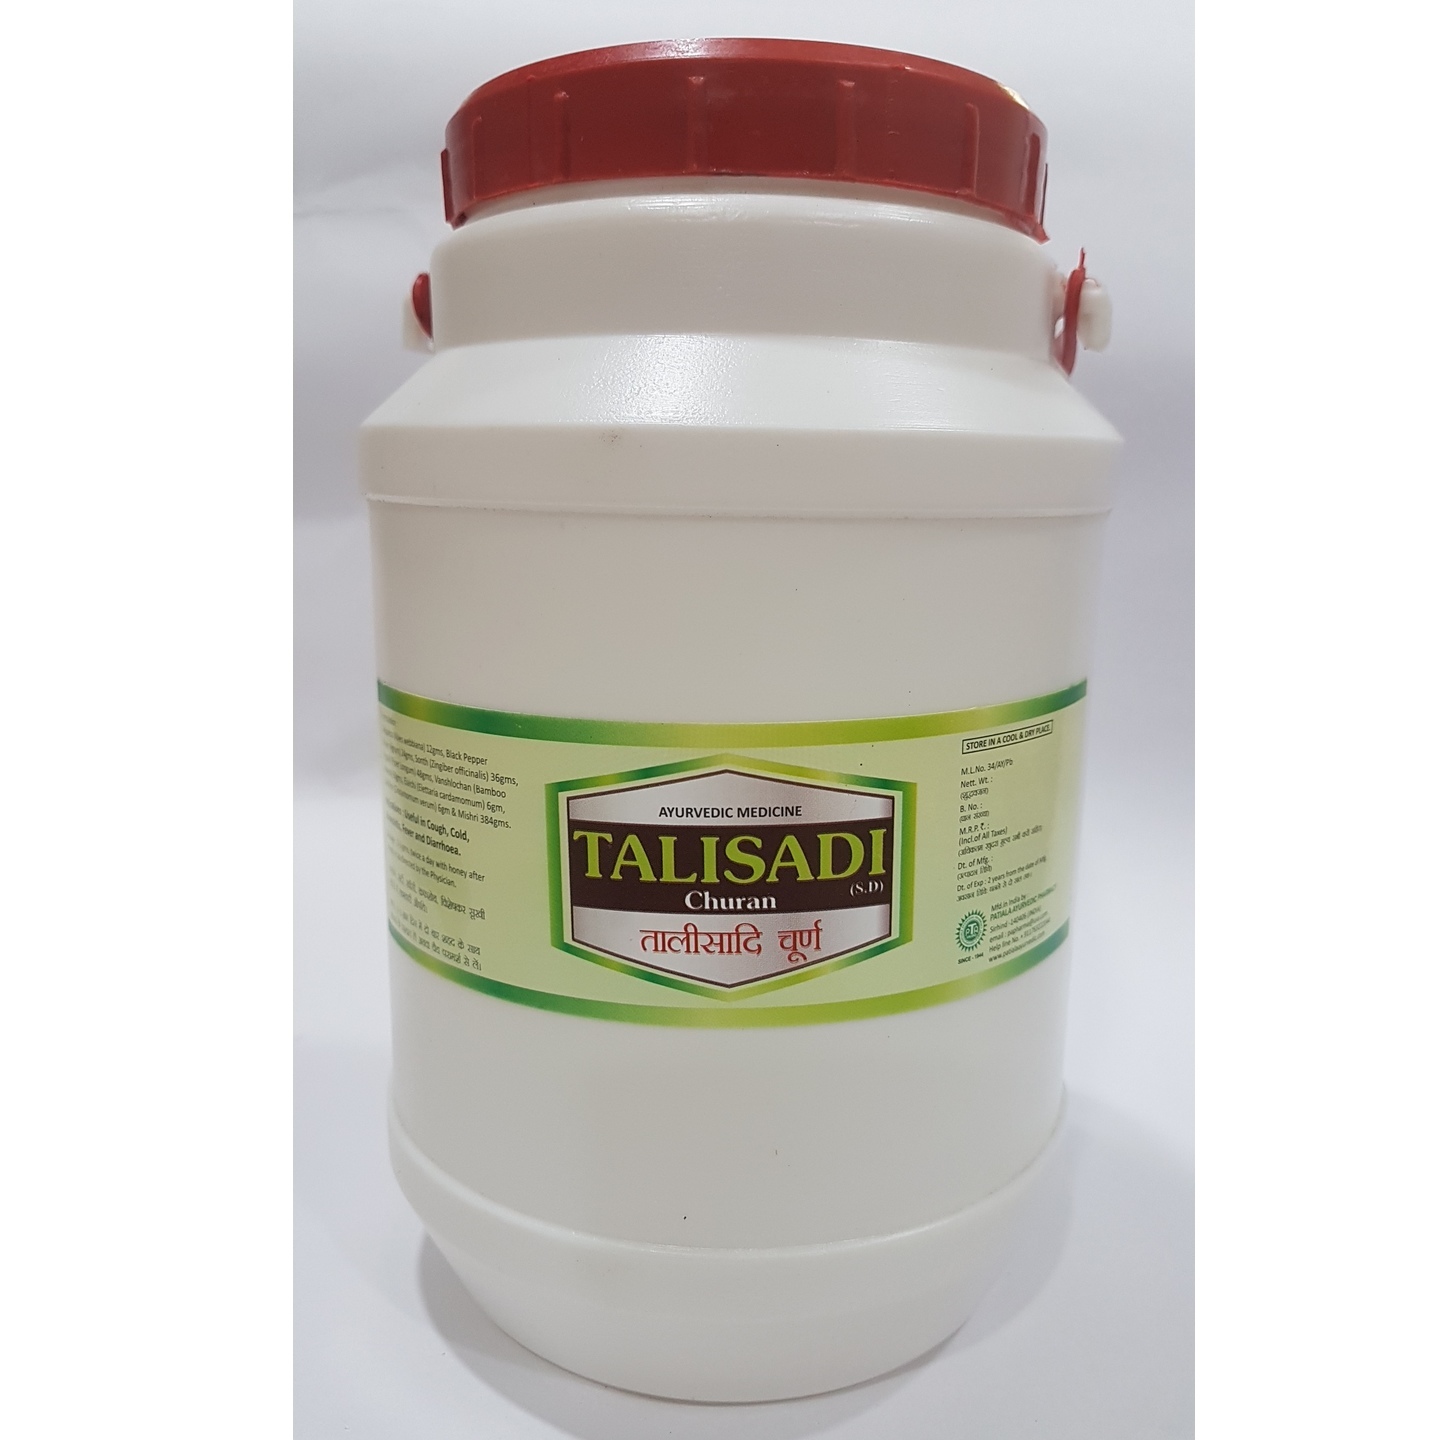 talisadi churan  For cough,cold & fever 1 KG X 1